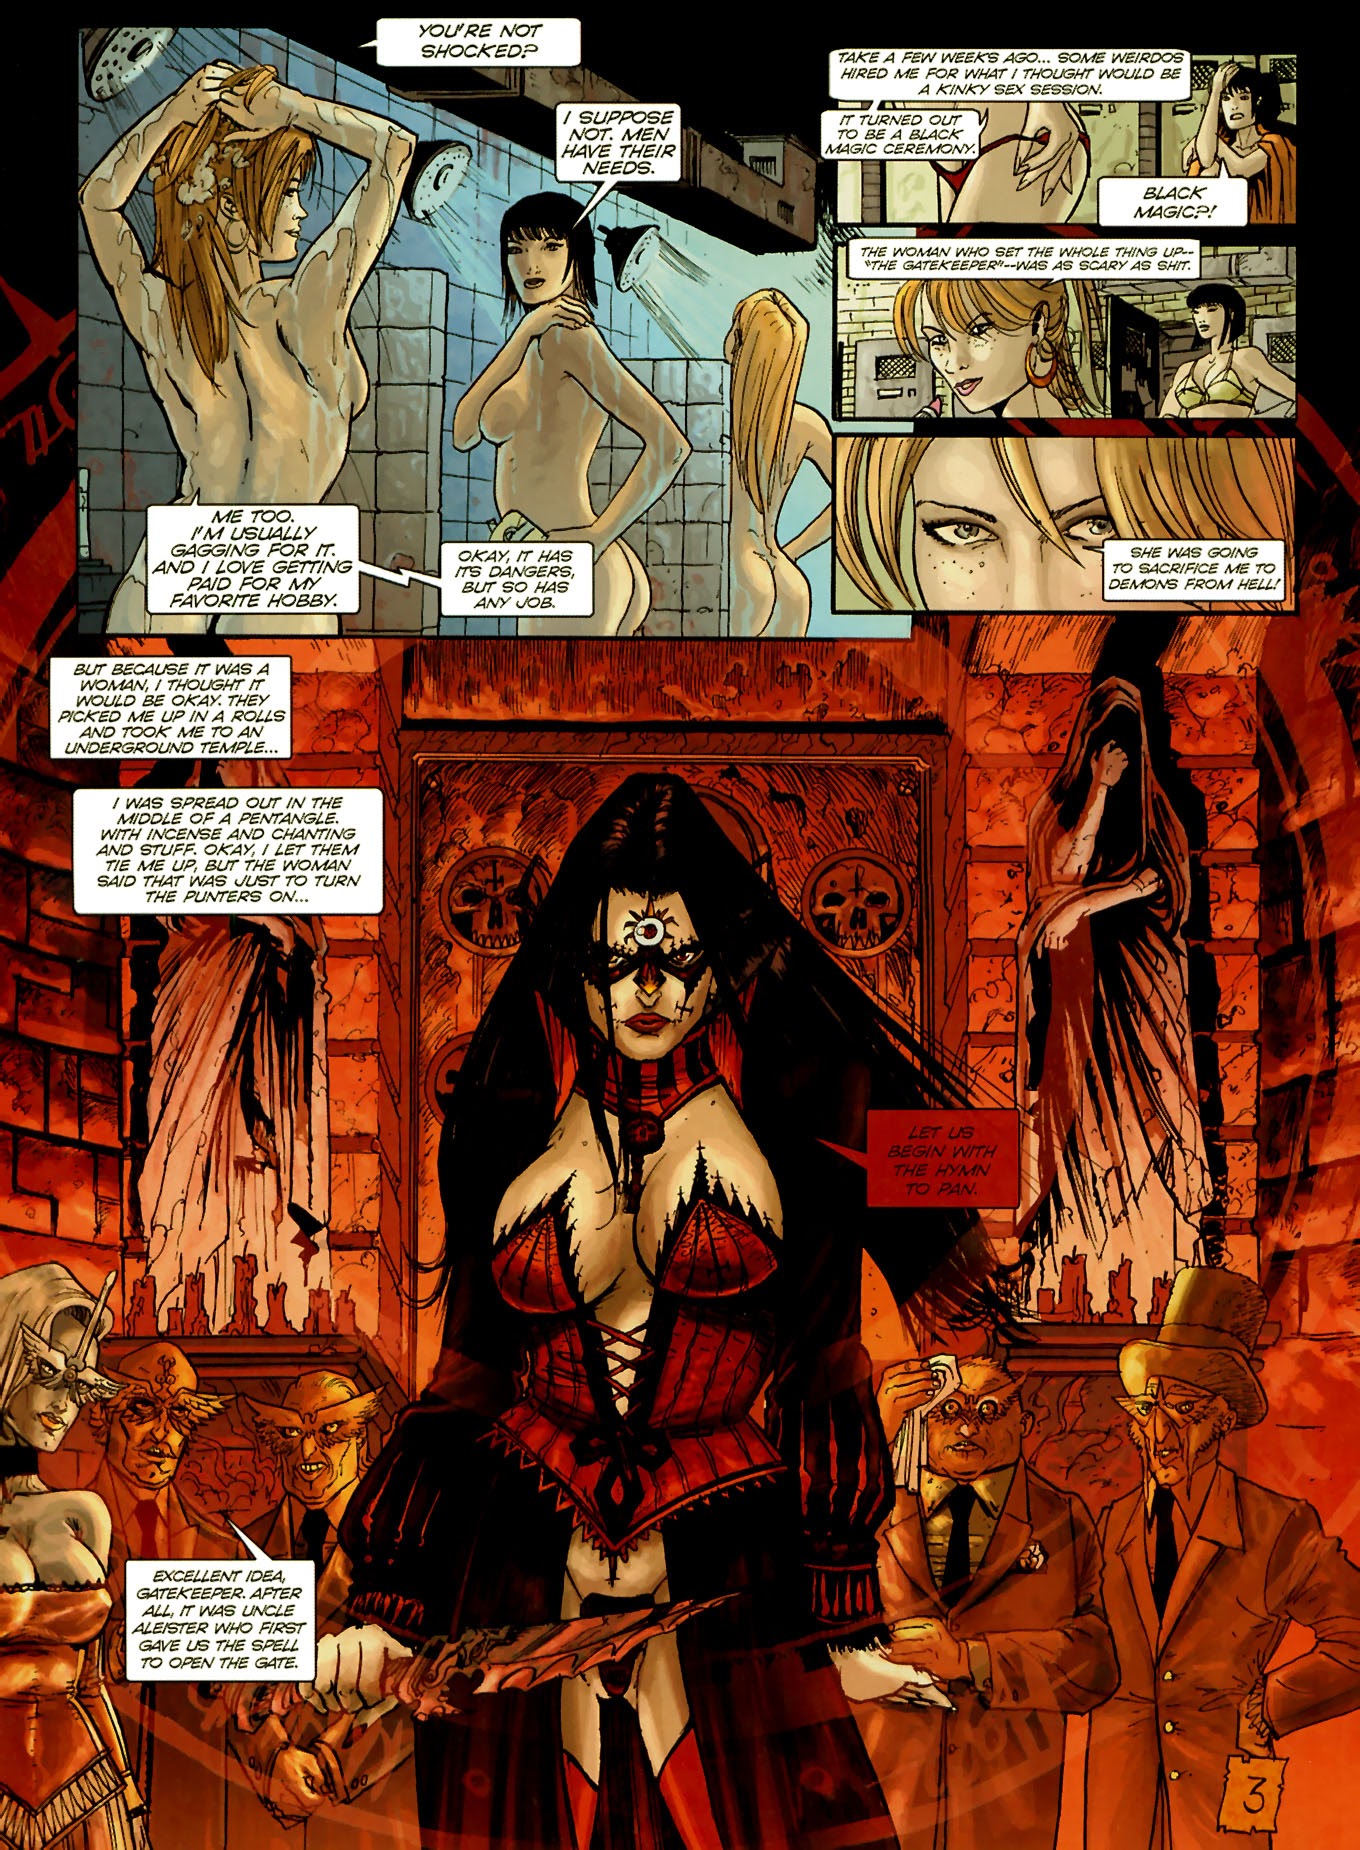 Claudia Vampire Knight Issue 2 | Read Claudia Vampire Knight Issue 2 comic  online in high quality. Read Full Comic online for free - Read comics  online in high quality .|viewcomiconline.com